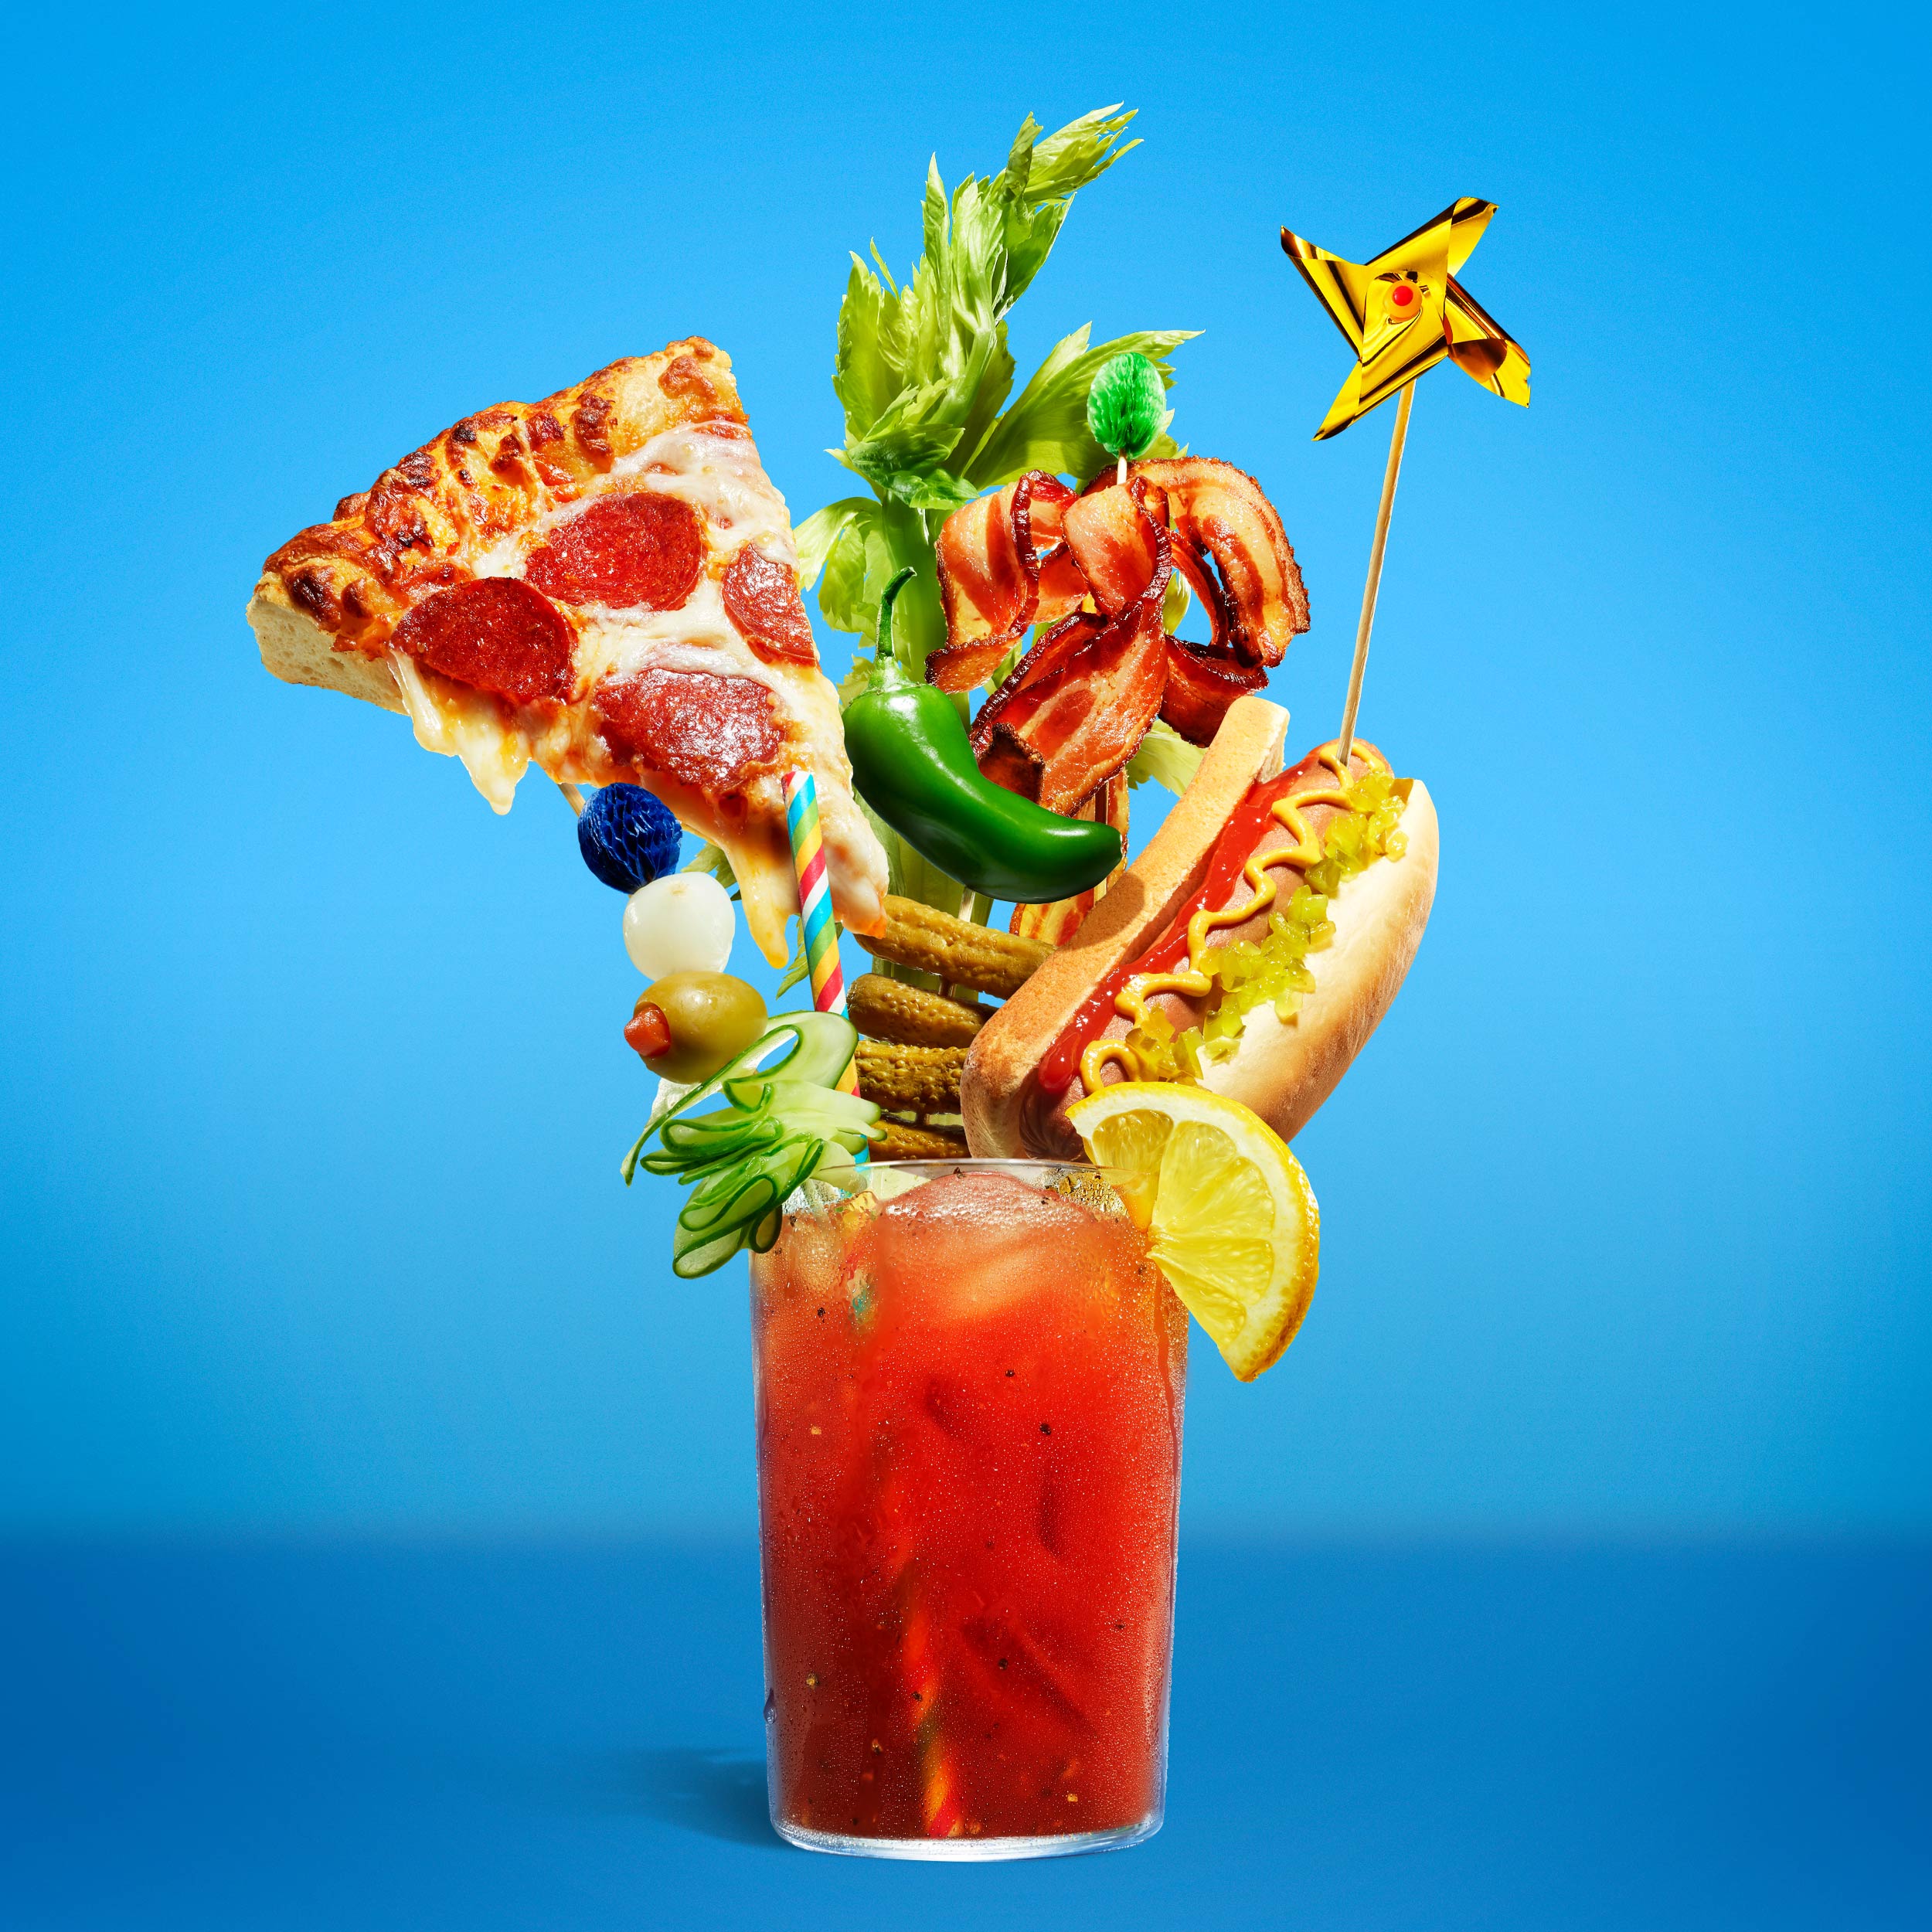 Annabelle_Breakey_Beverage_Photographer_Food_Photography_Bloody_Mary